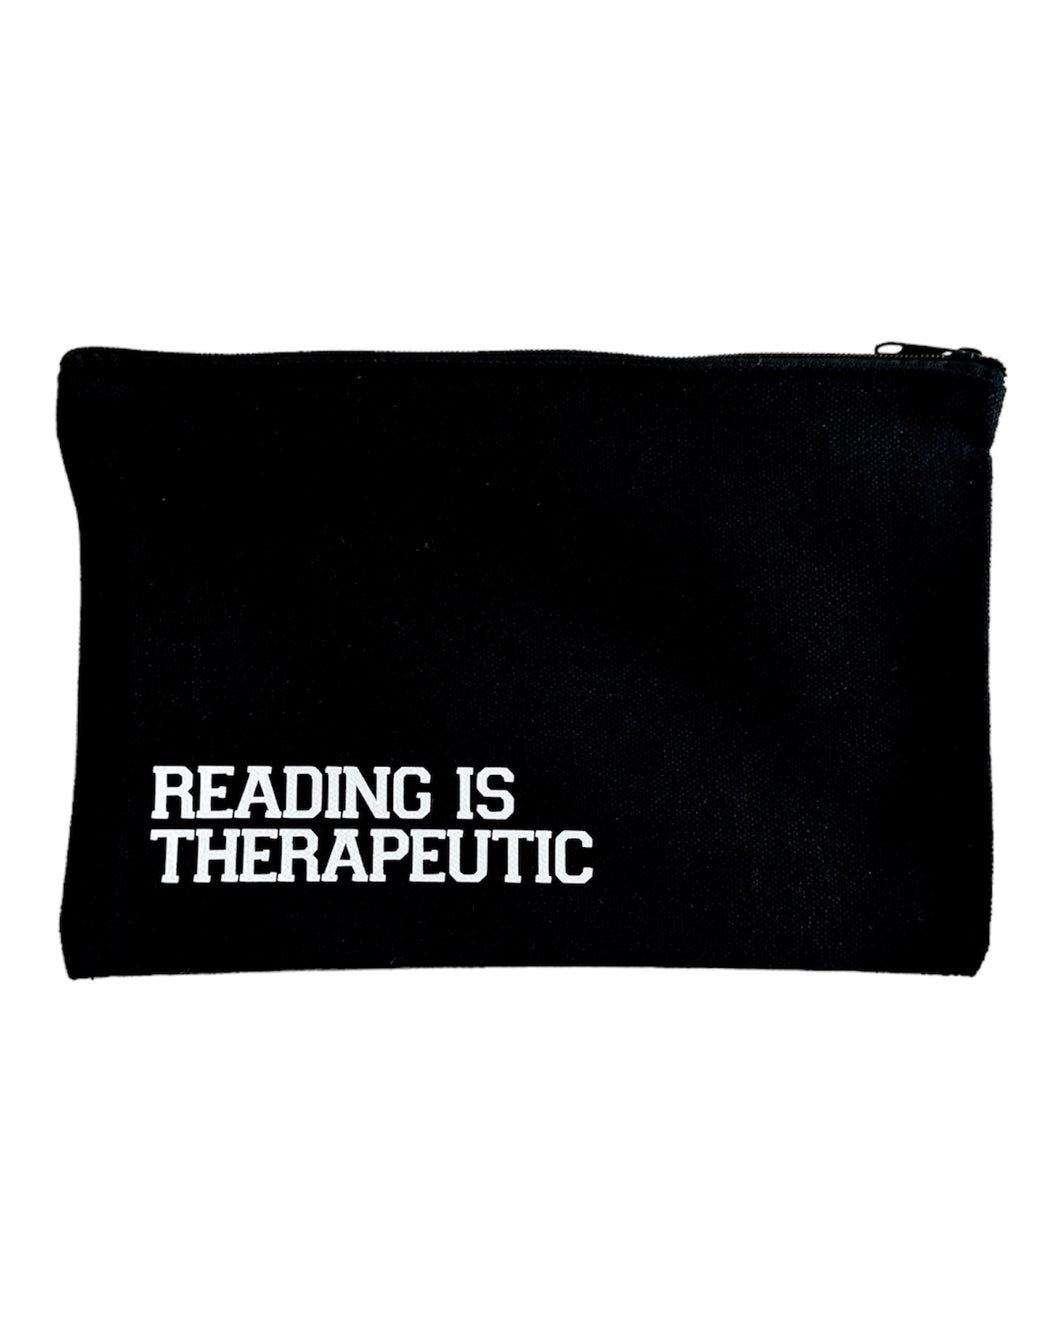 Reading is Therapeutic Zipper Pouch